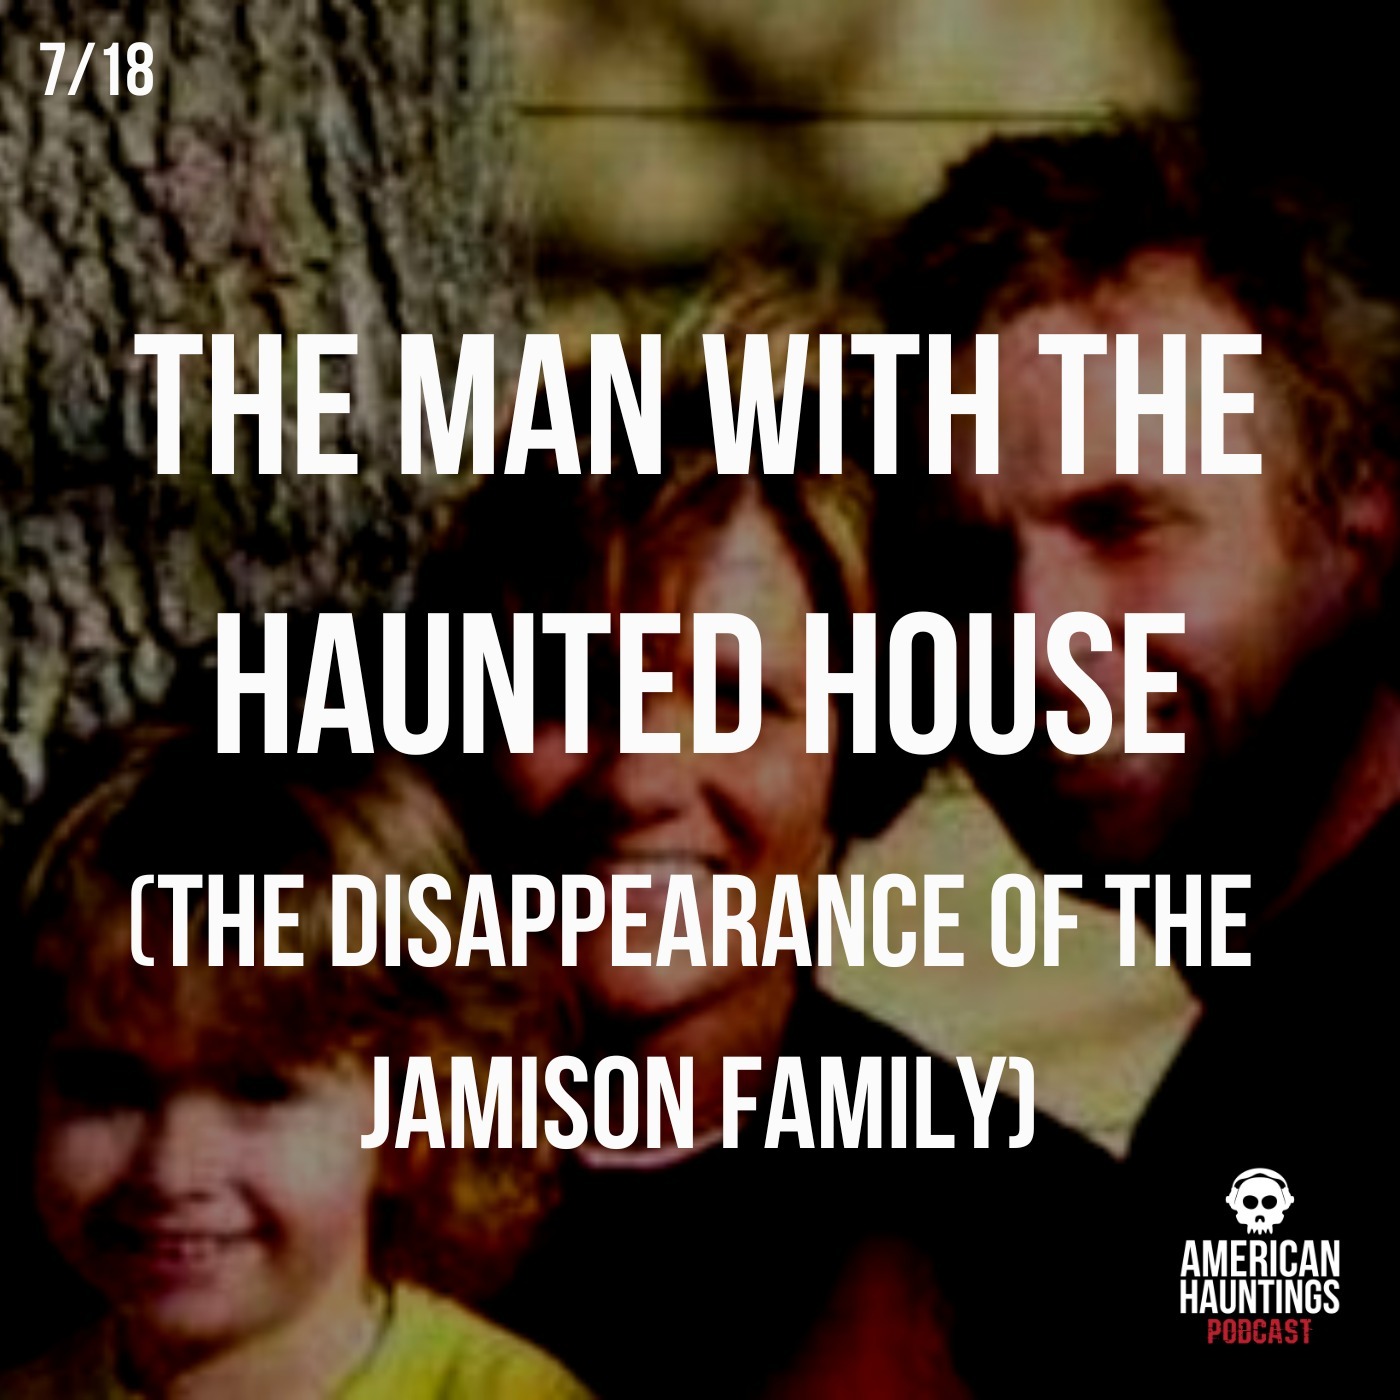 The Disappearance of the Jamison Family